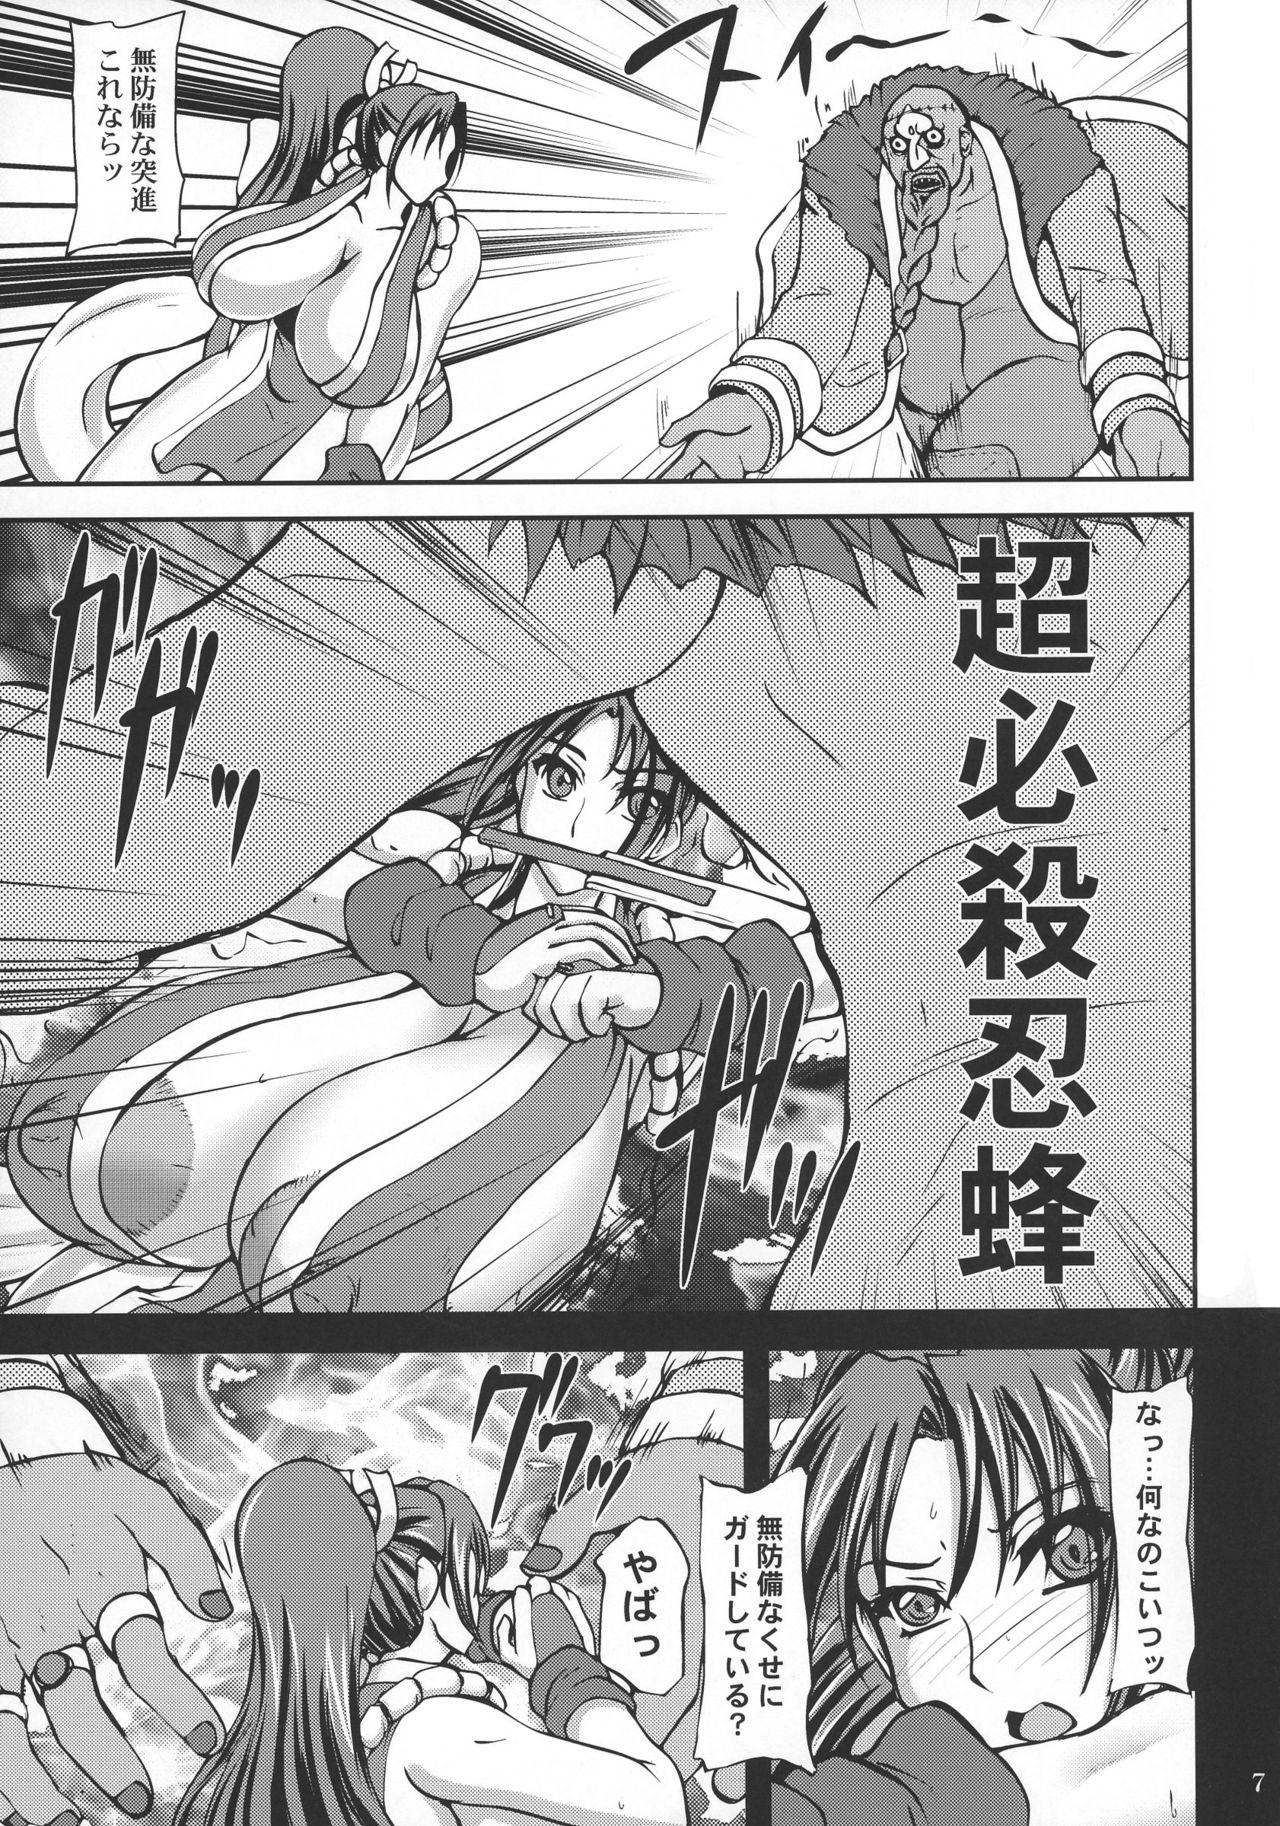 Exhib 14 - King of fighters Clitoris - Page 7